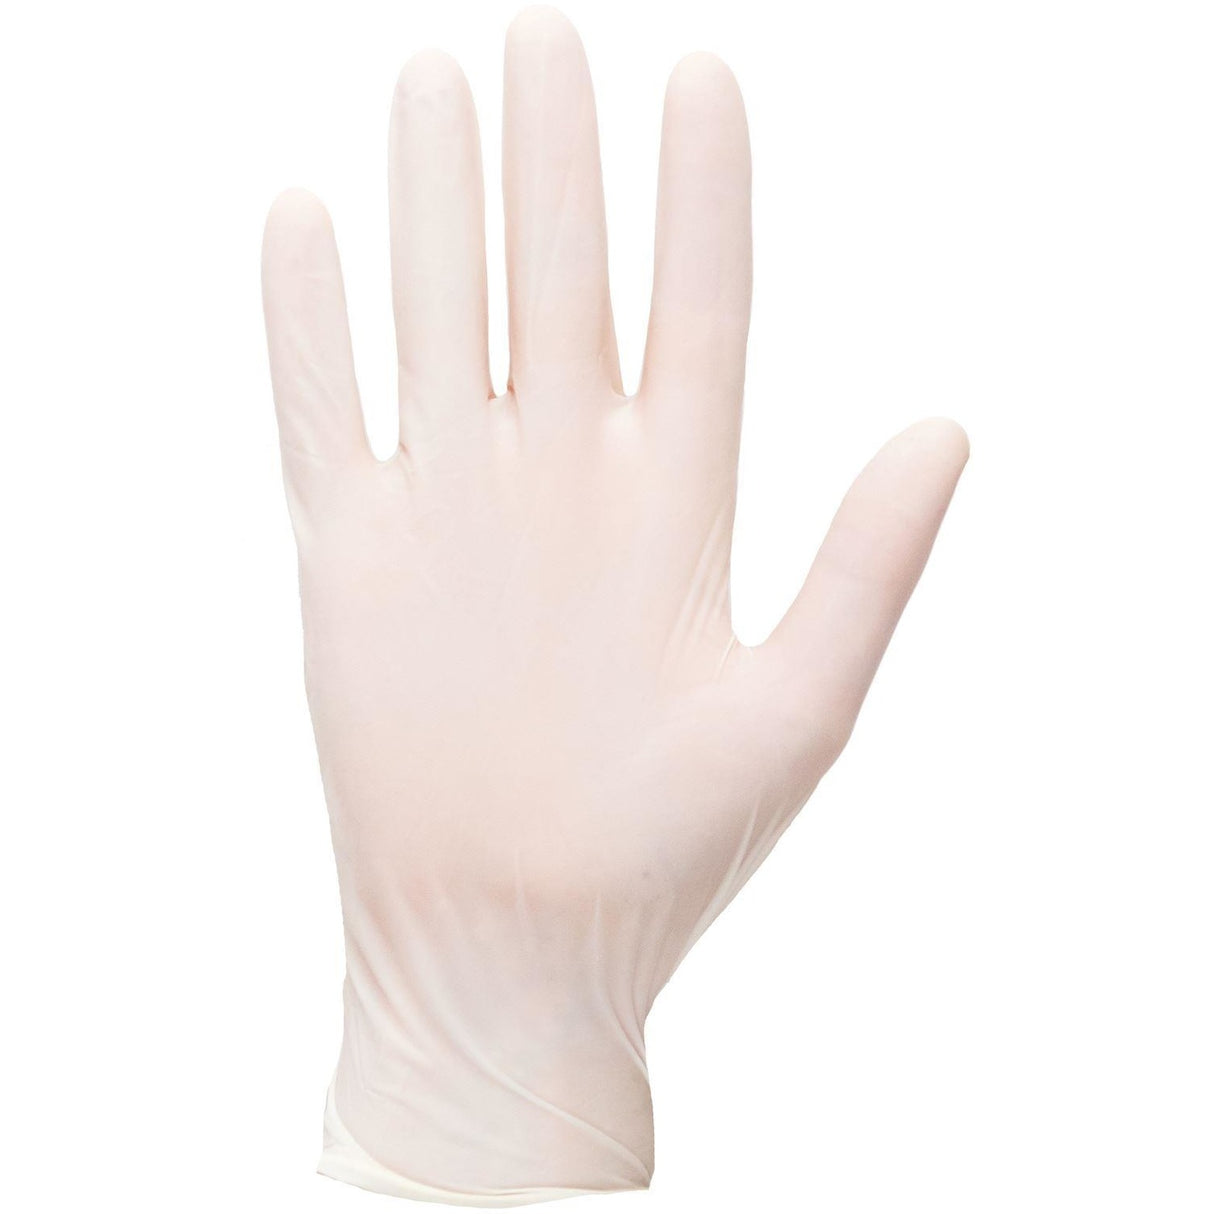 Portwest Powder Free Latex Disposable Gloves